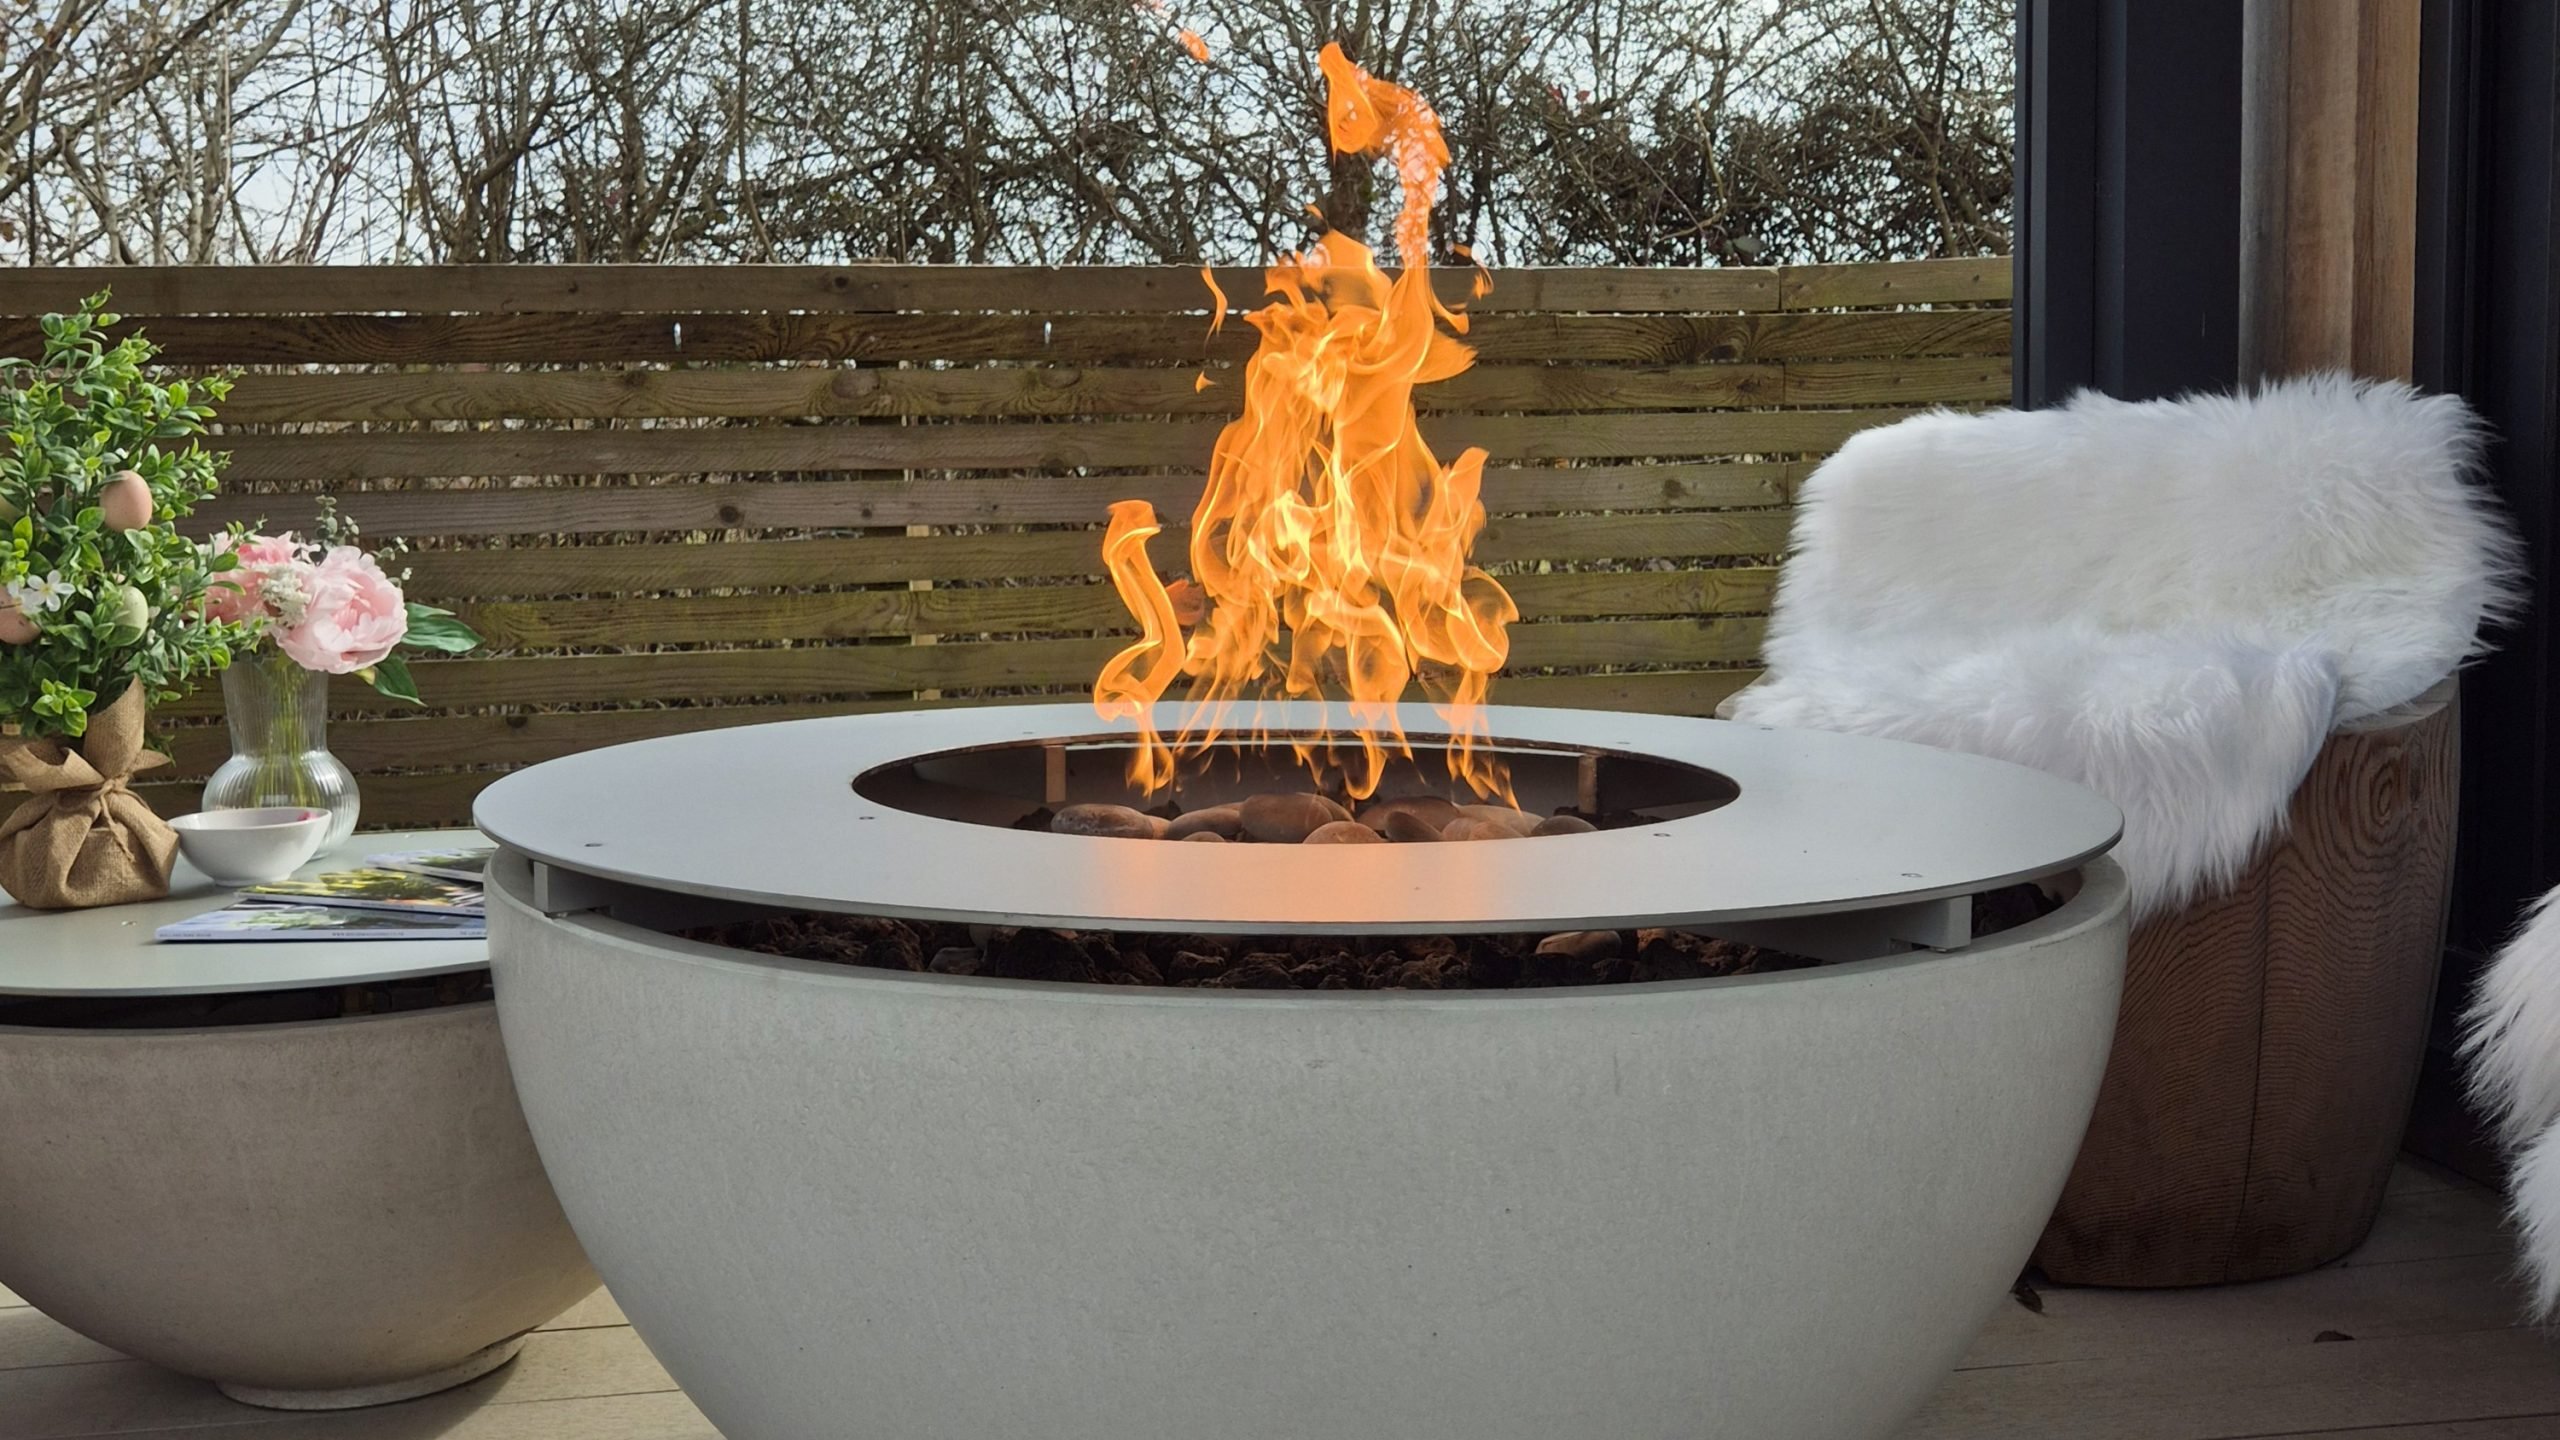 Are fire pits legal in Louisiana?